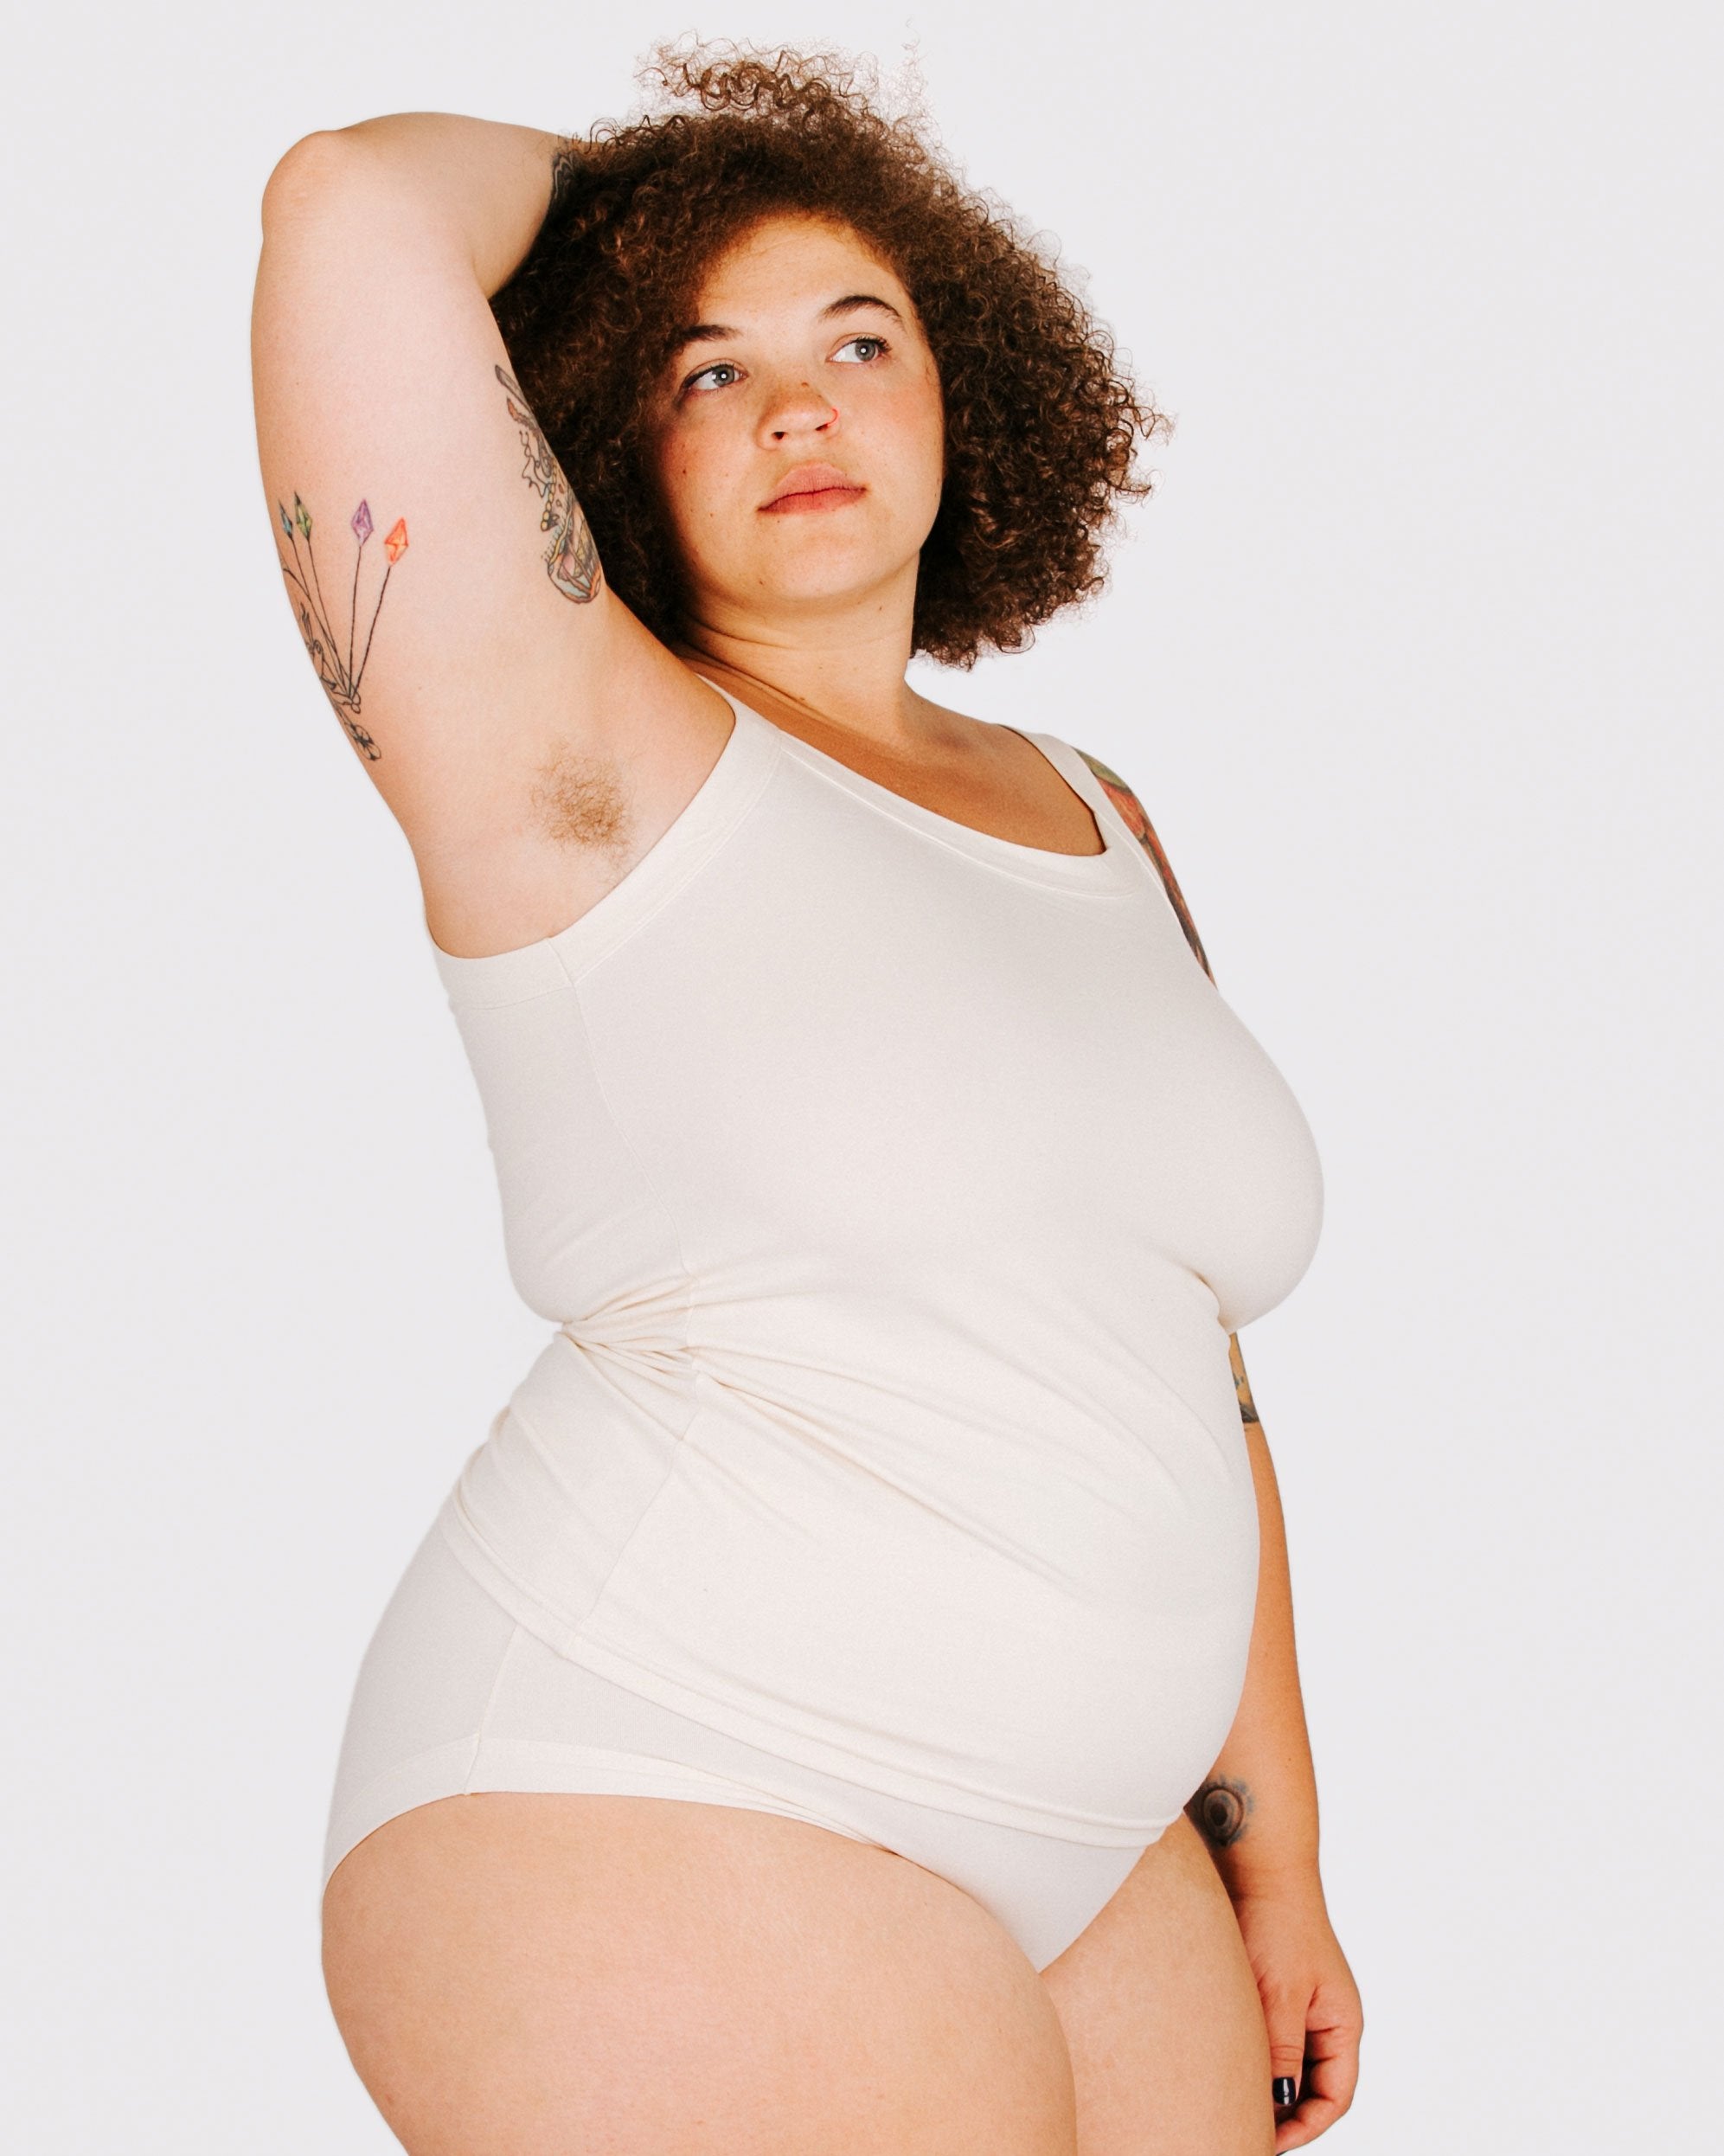 Fit photo from the side of Thunderpants organic cotton Camisole and Hipster style underwear in off-white on a model.